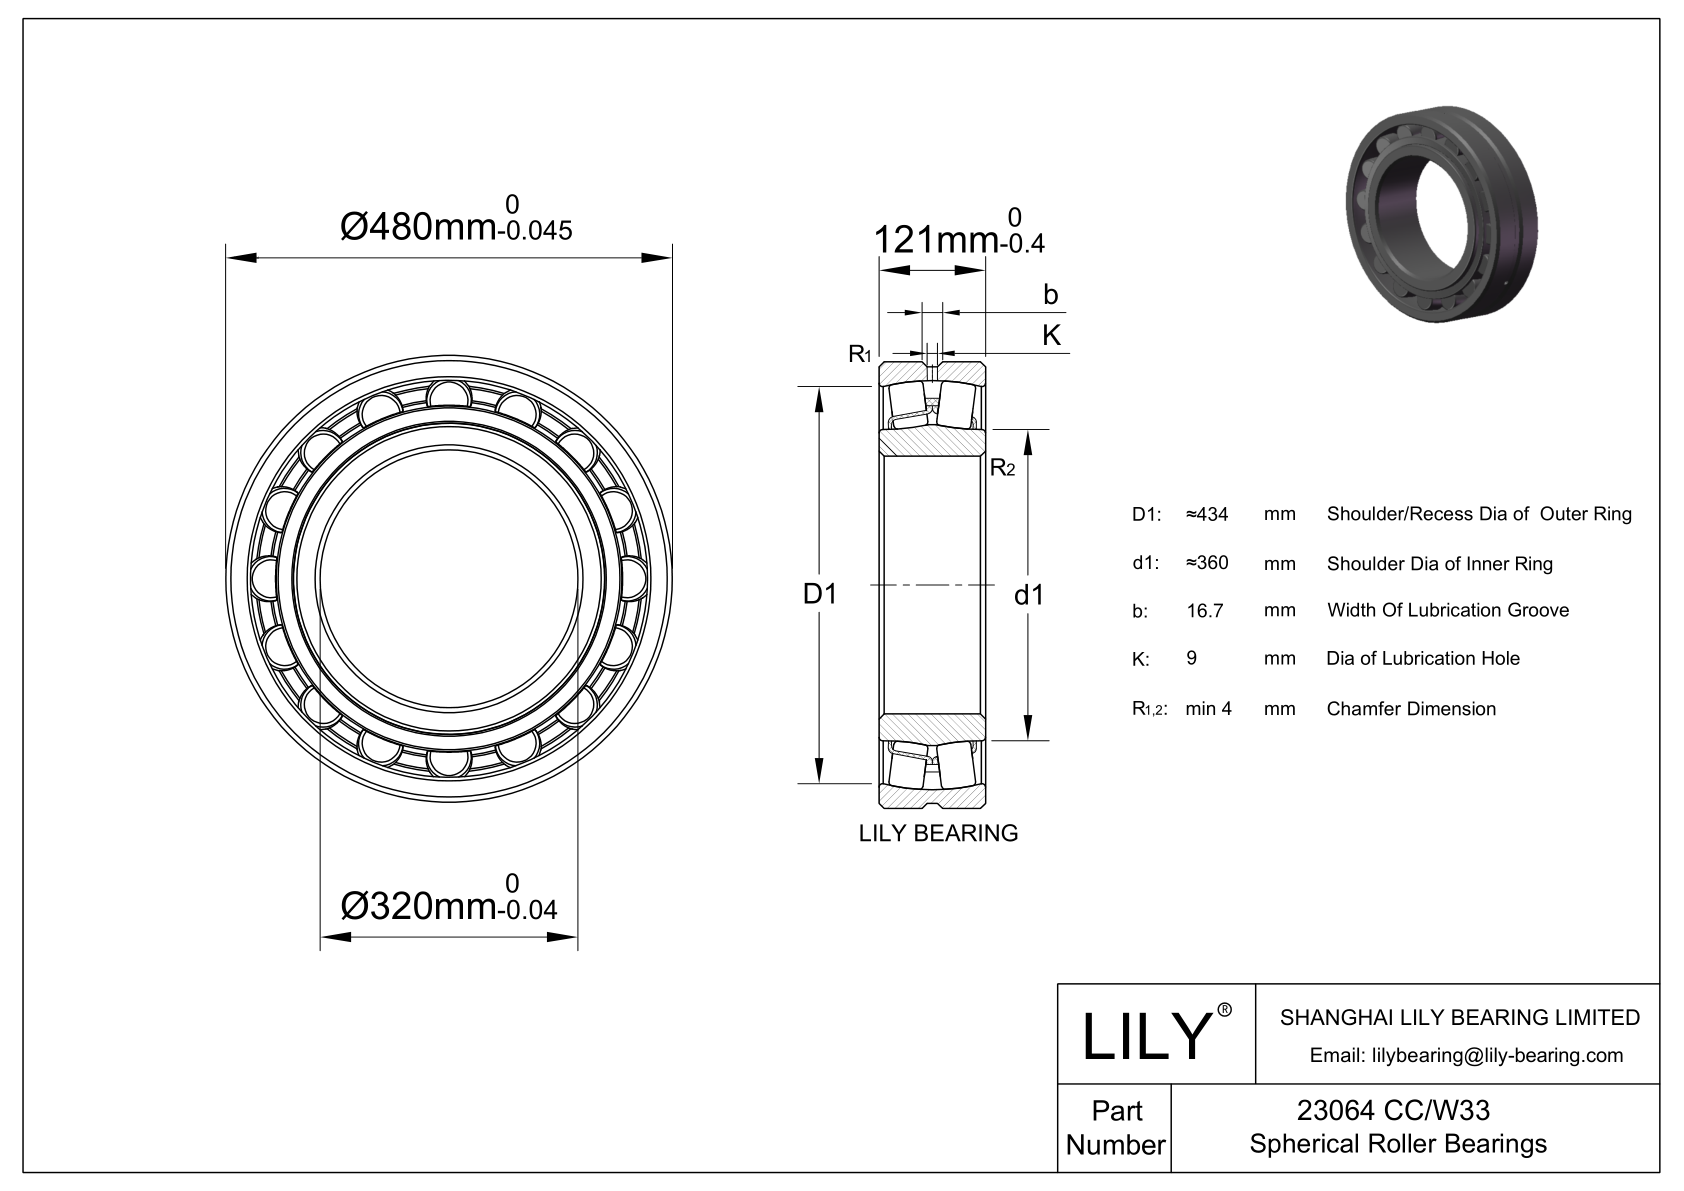 23064 CC/W33 Double Row Spherical Roller Bearing cad drawing